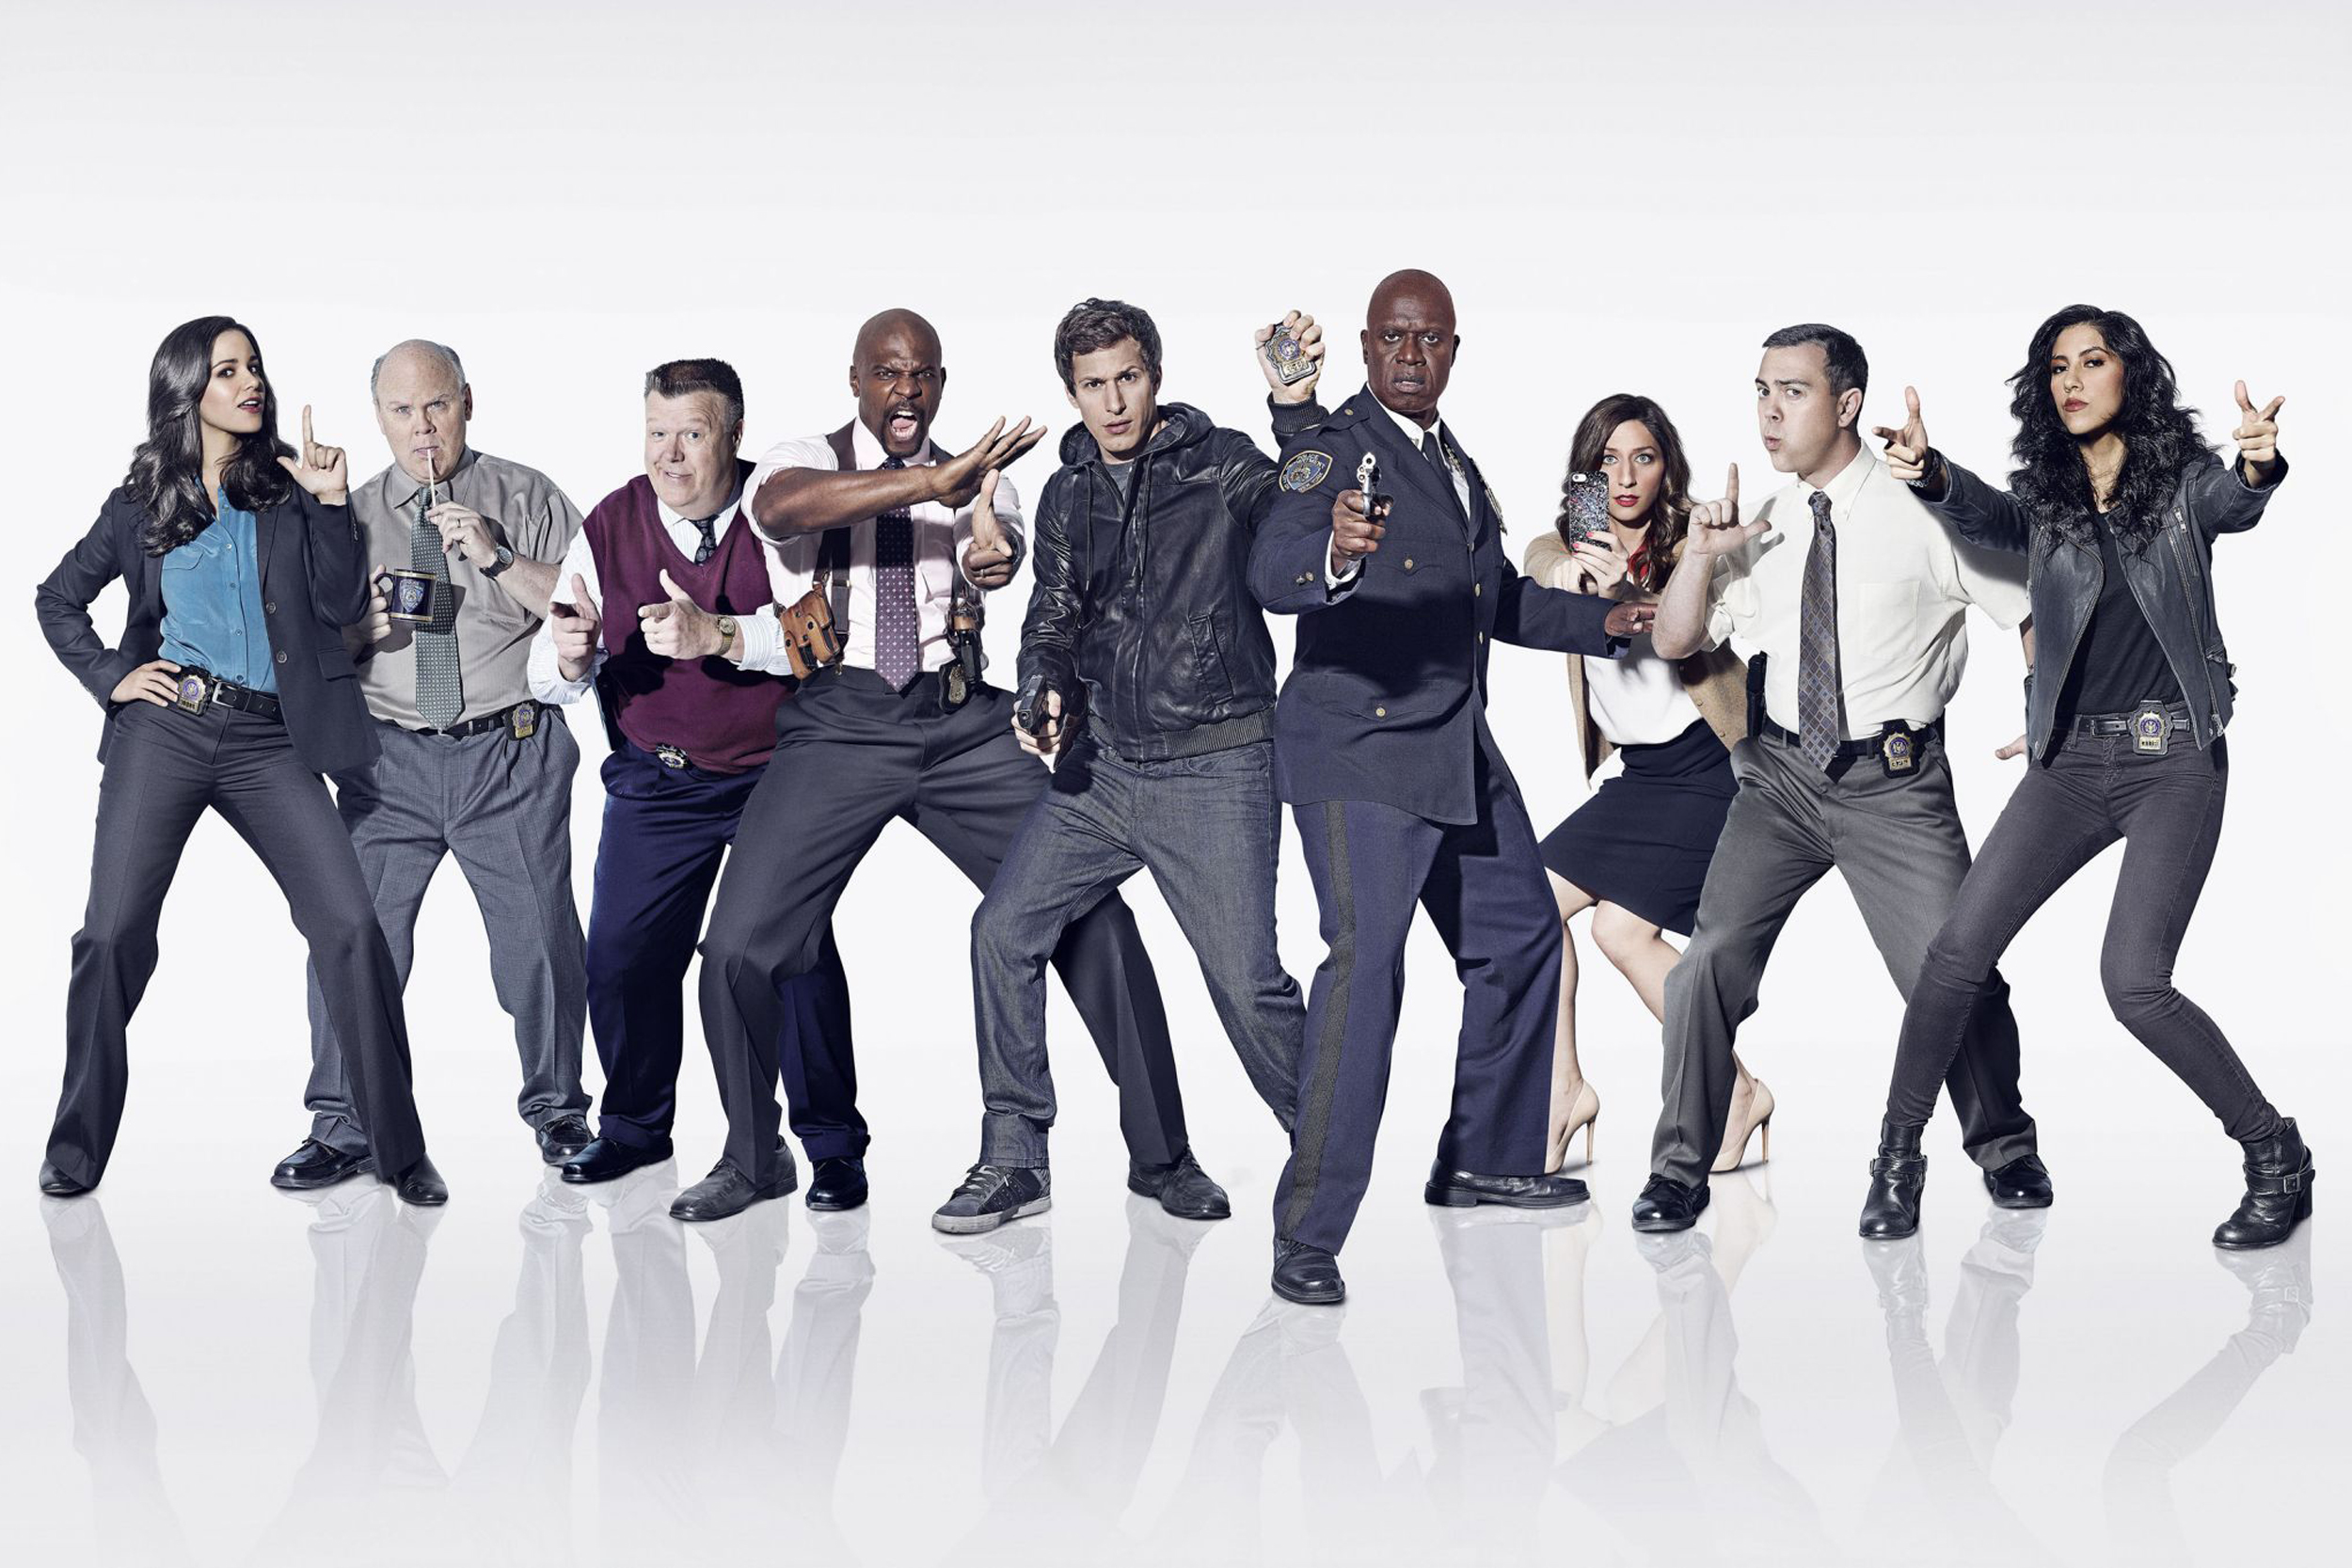 Brooklyn Nine-Nine Allows Us to Find Humor in the Police Post-Ferguson